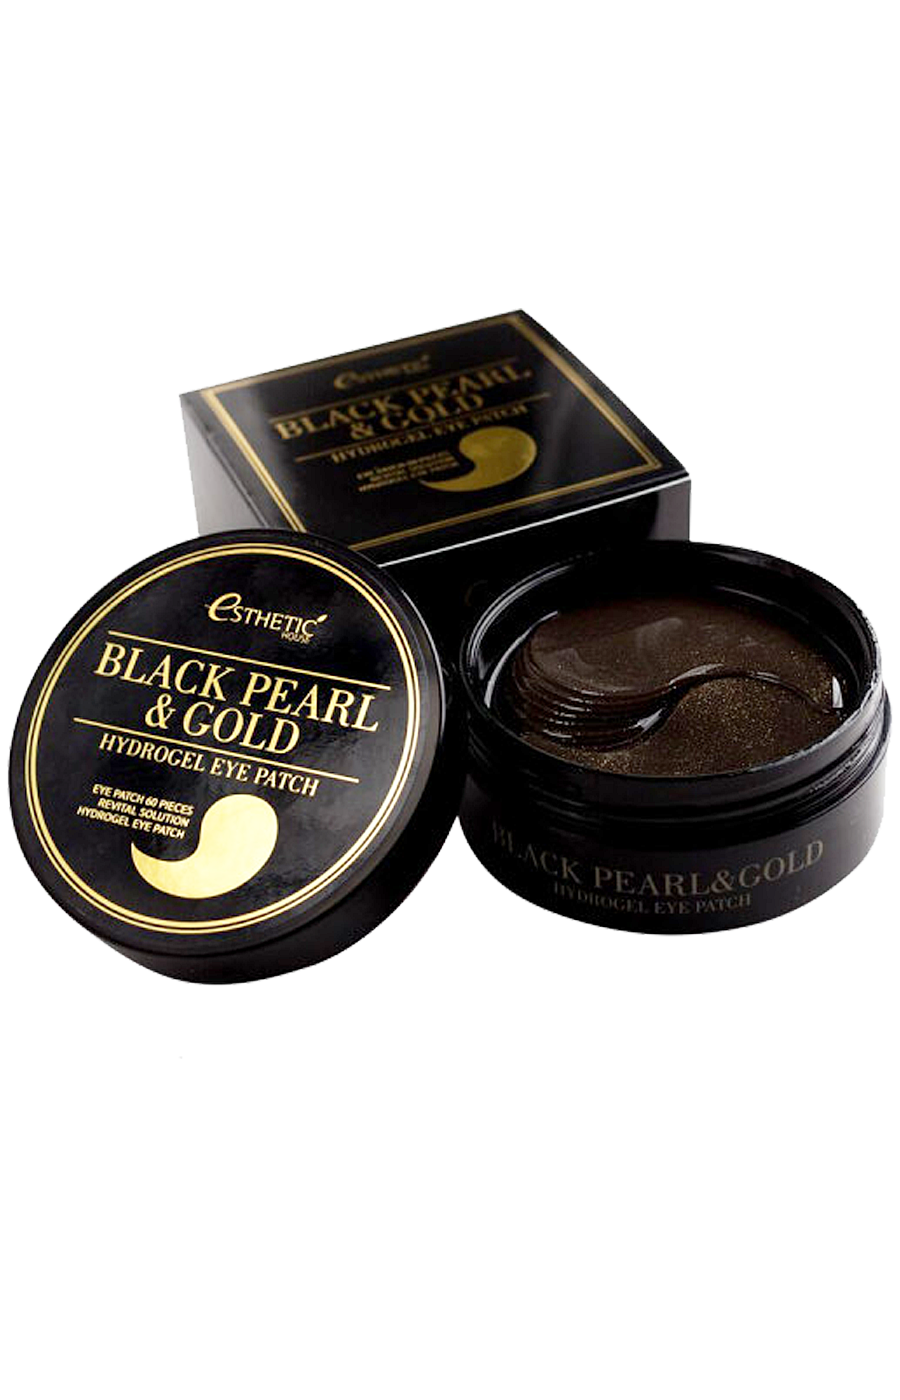 Гидрогелевые патчи gold. Black Pearl Gold Hydrogel Eye Patch. Esthetic House Black Pearl Gold Hydrogel Eye Patch. Патчи для Esthetic, 60шт. Патчи Black Pearl and Gold.